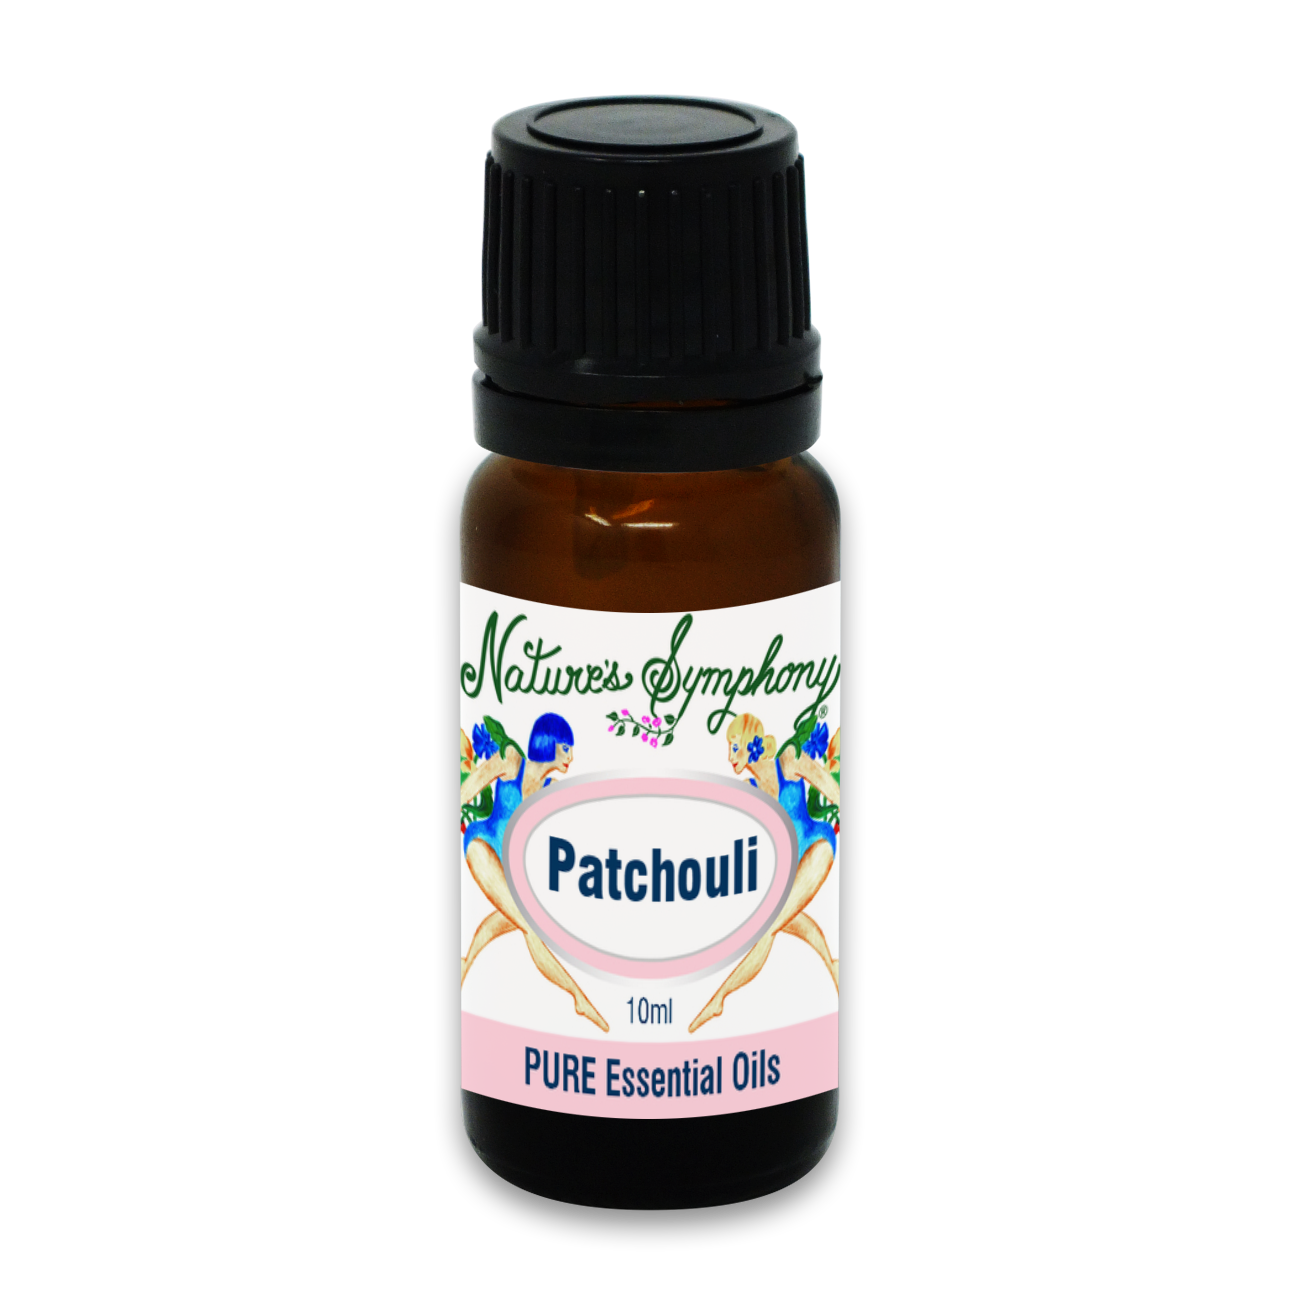 Patchouli, Ambiance Diffusion oil - 10ml